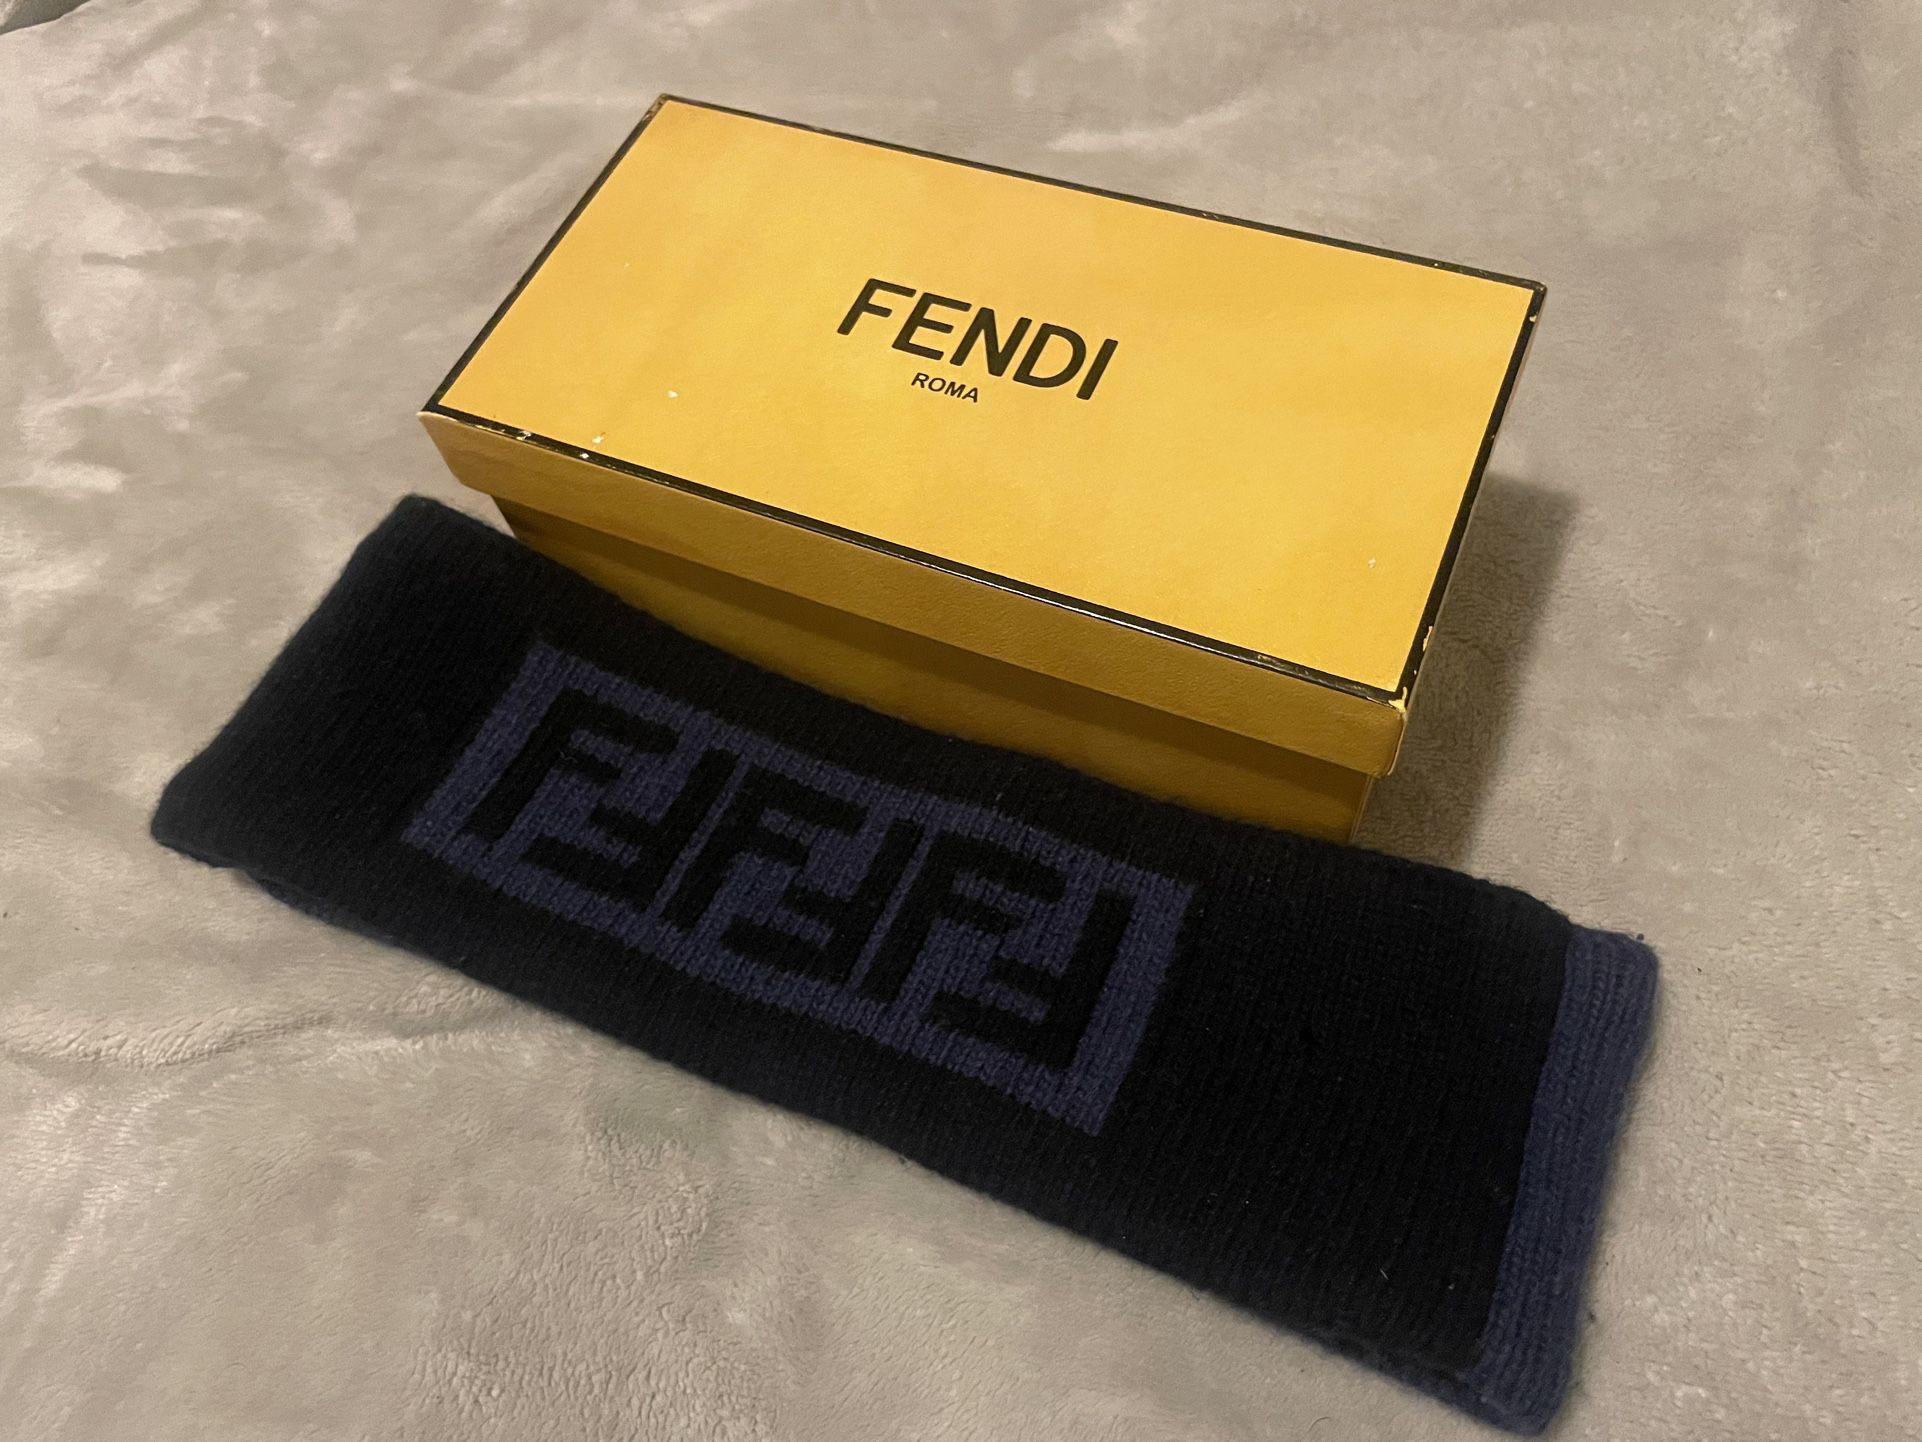 FENDI Headband for Sale in The Bronx, NY - OfferUp